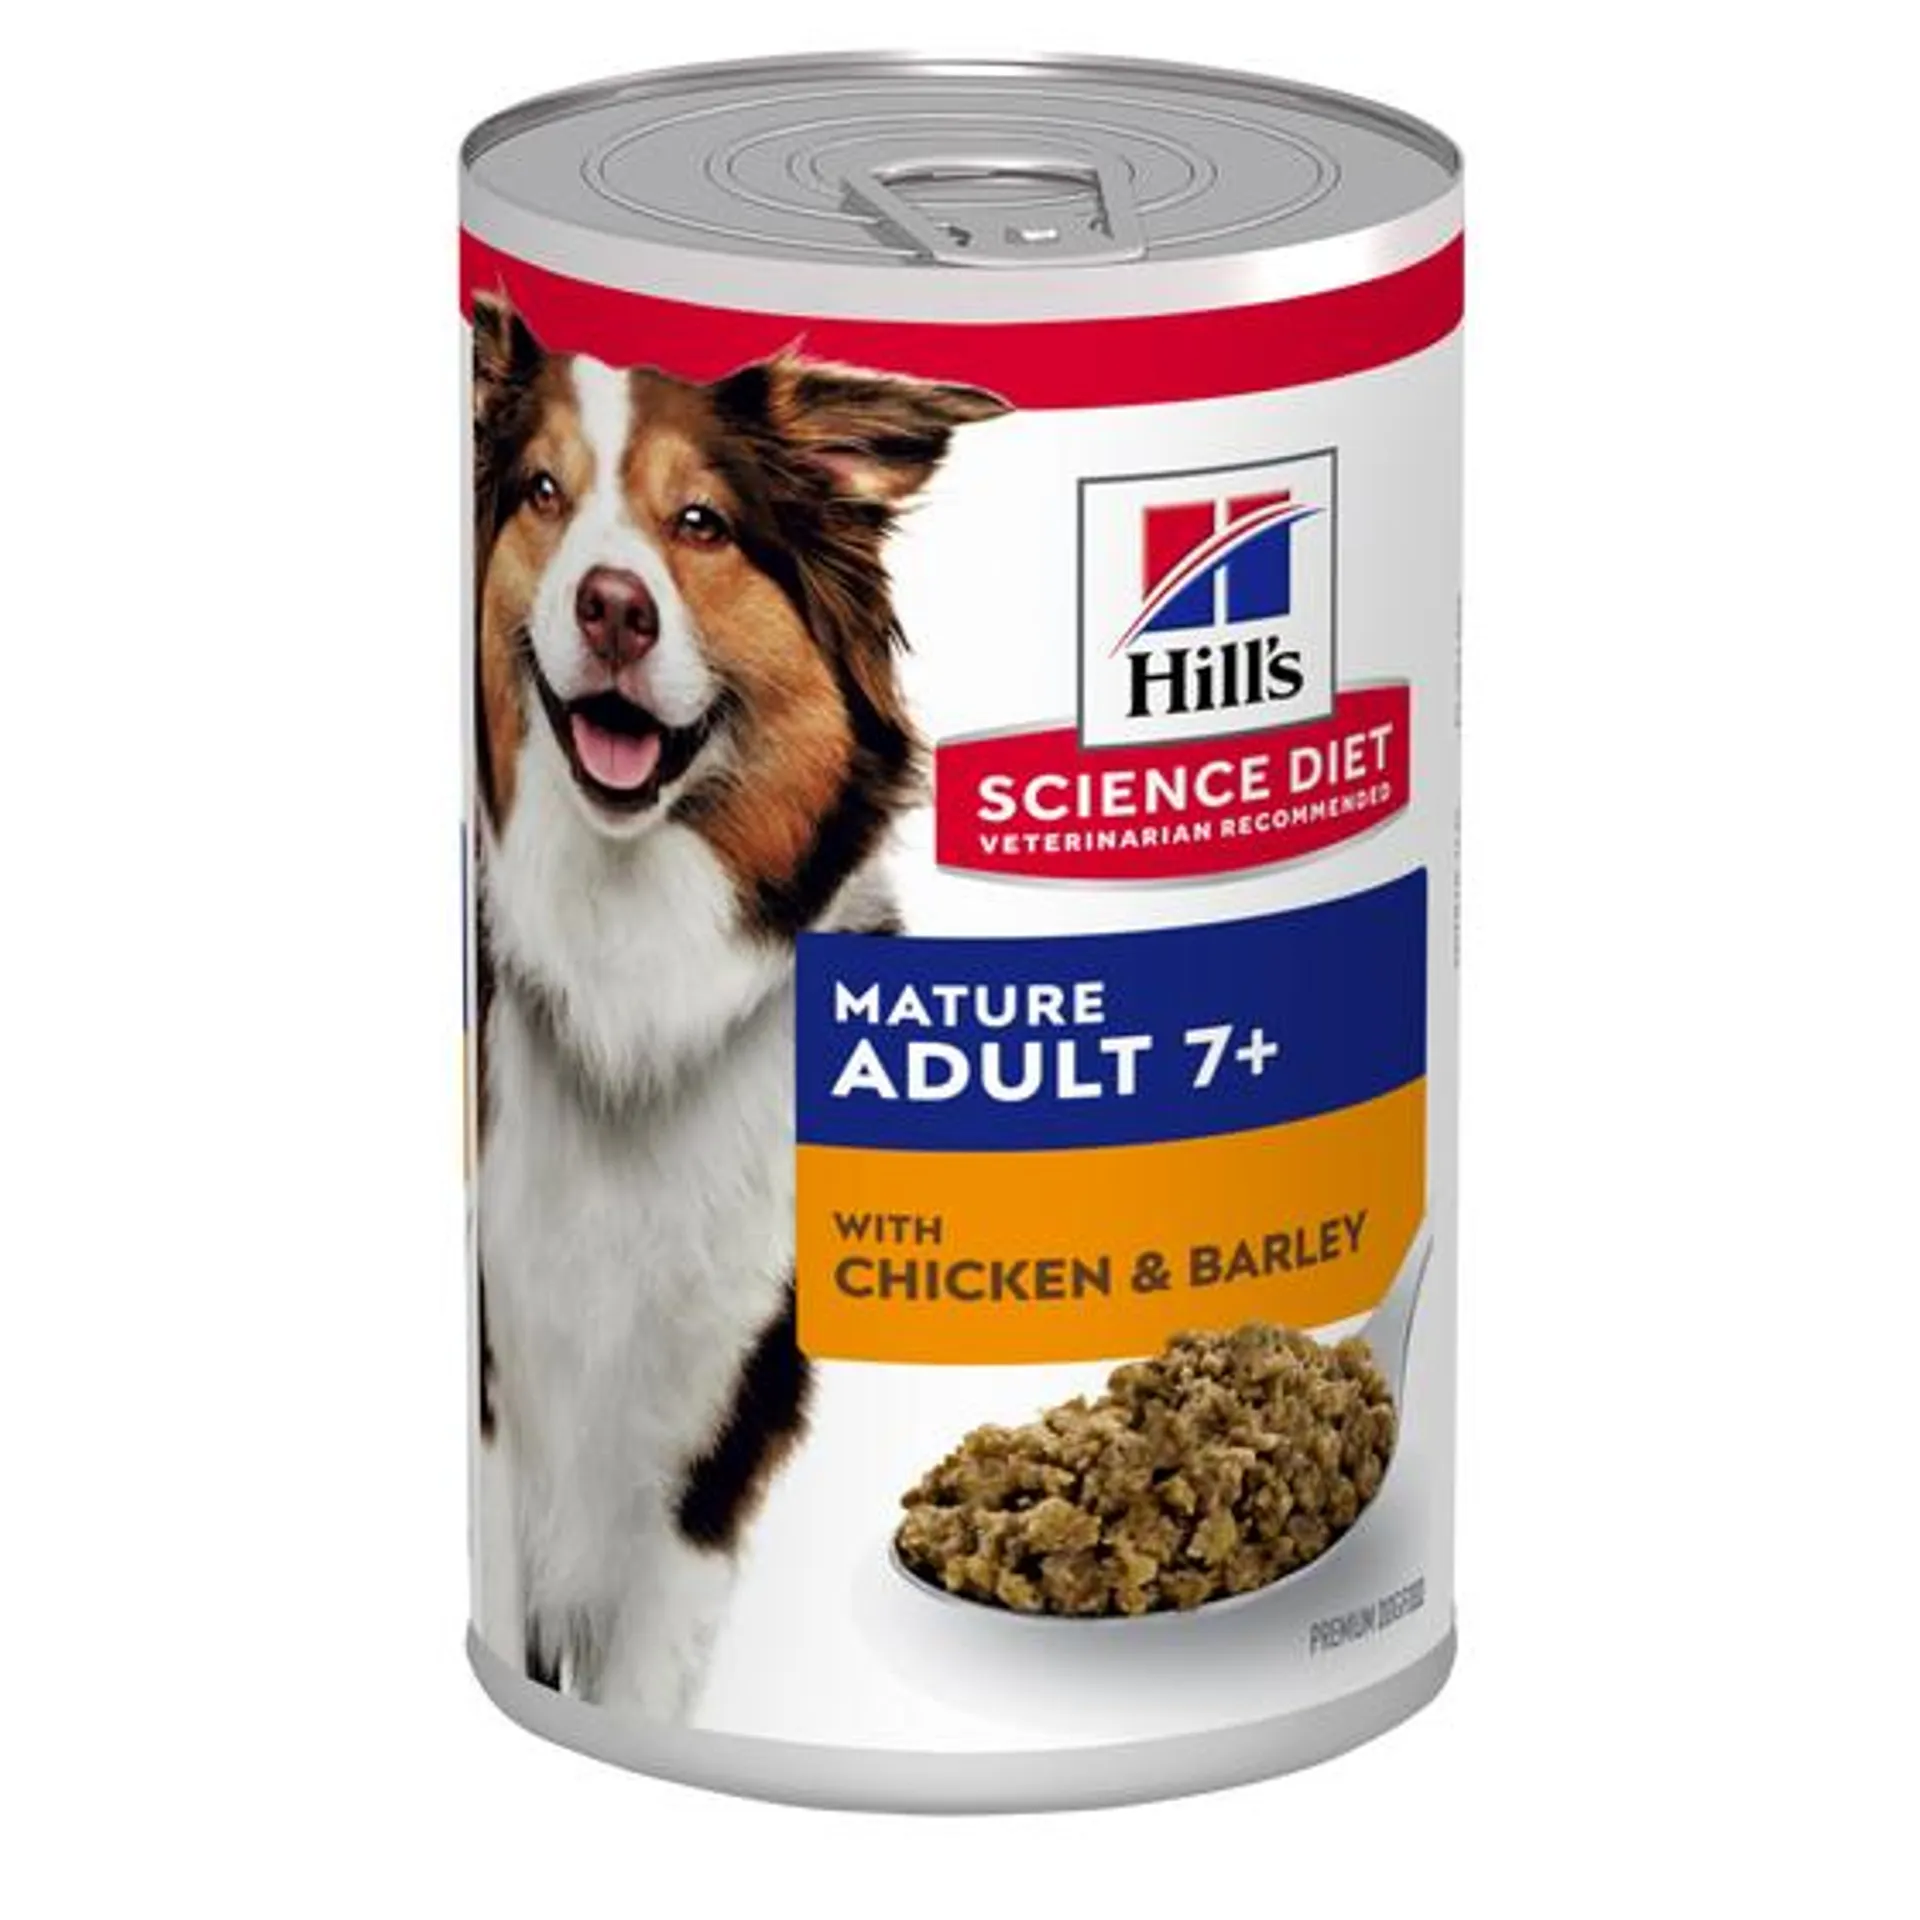 Hill's Science Diet 7+ Chicken & Barley Canned Dog Food 370g